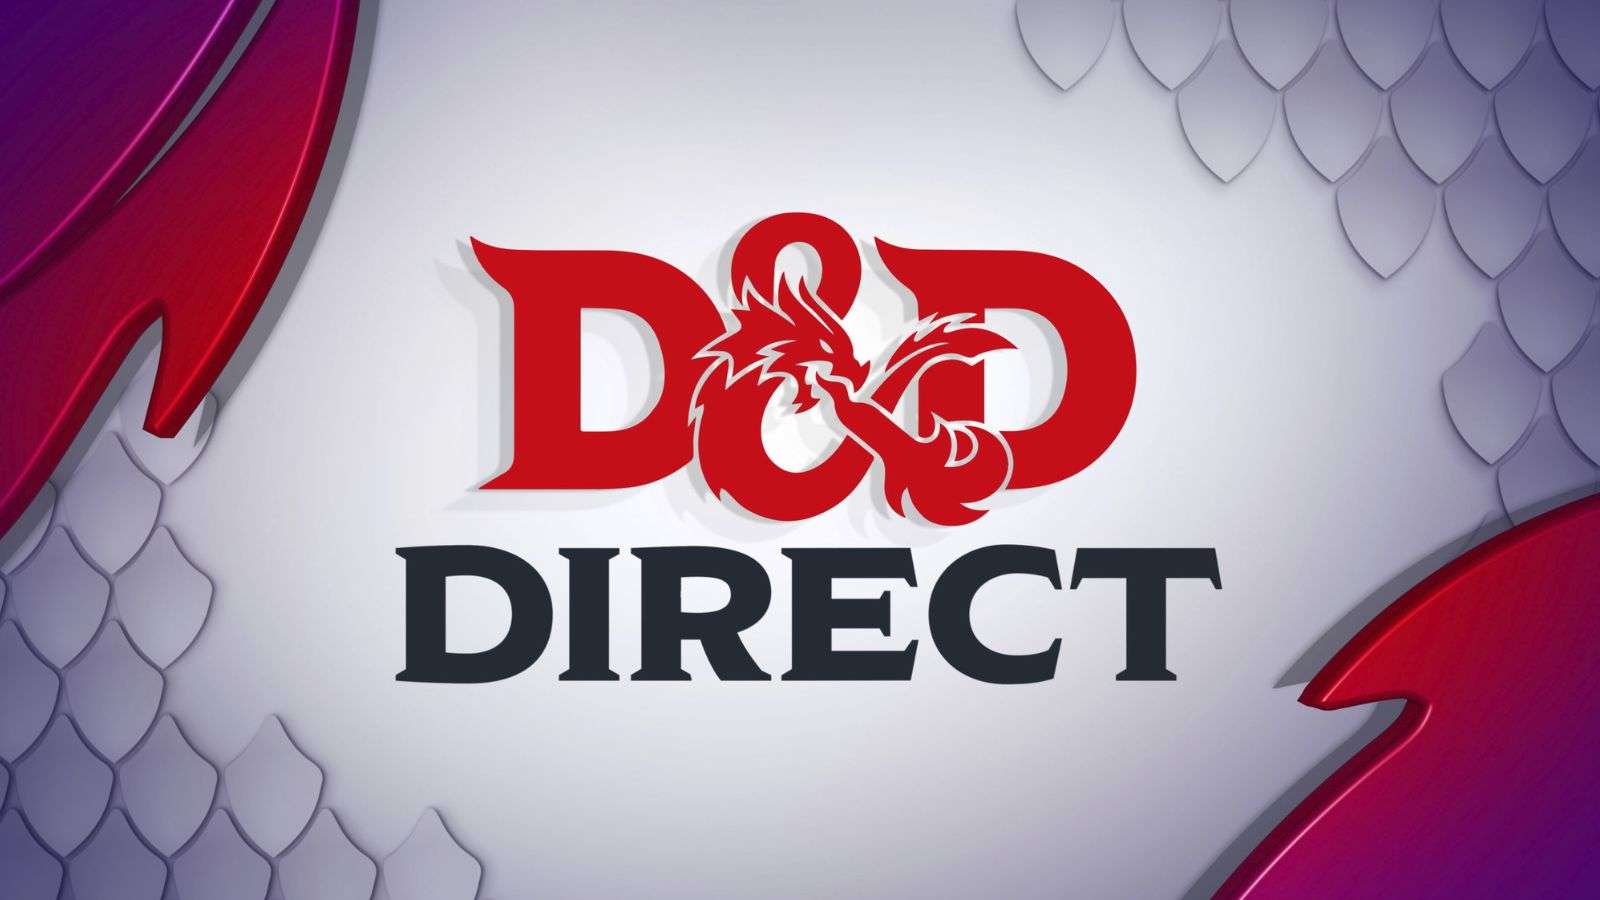 D&D Direct what happened